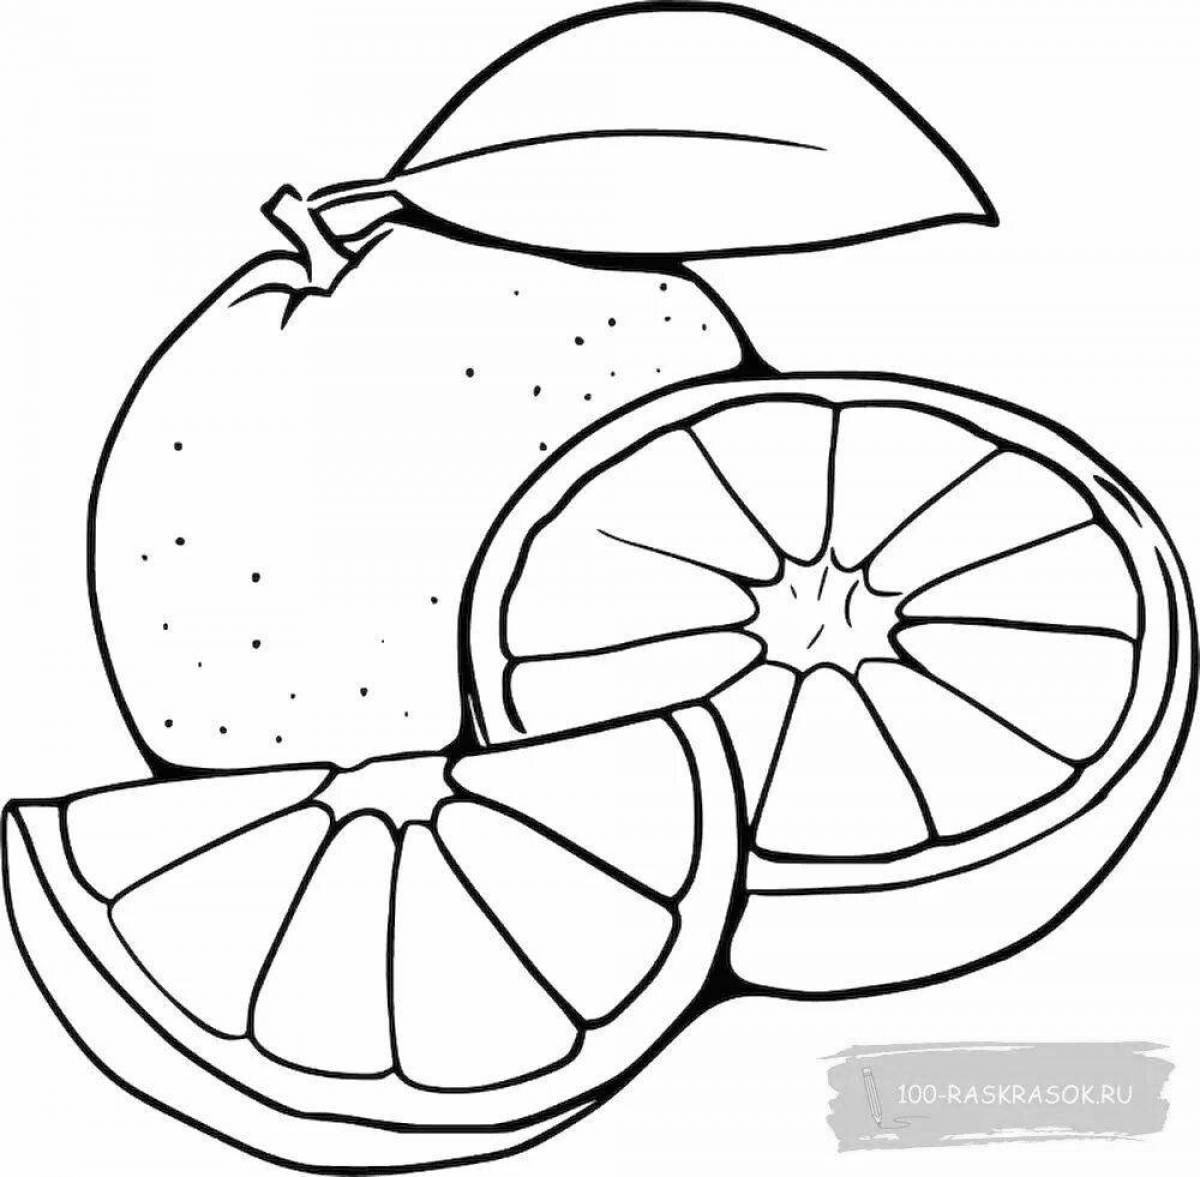 Fun orange coloring book for 3-4 year olds